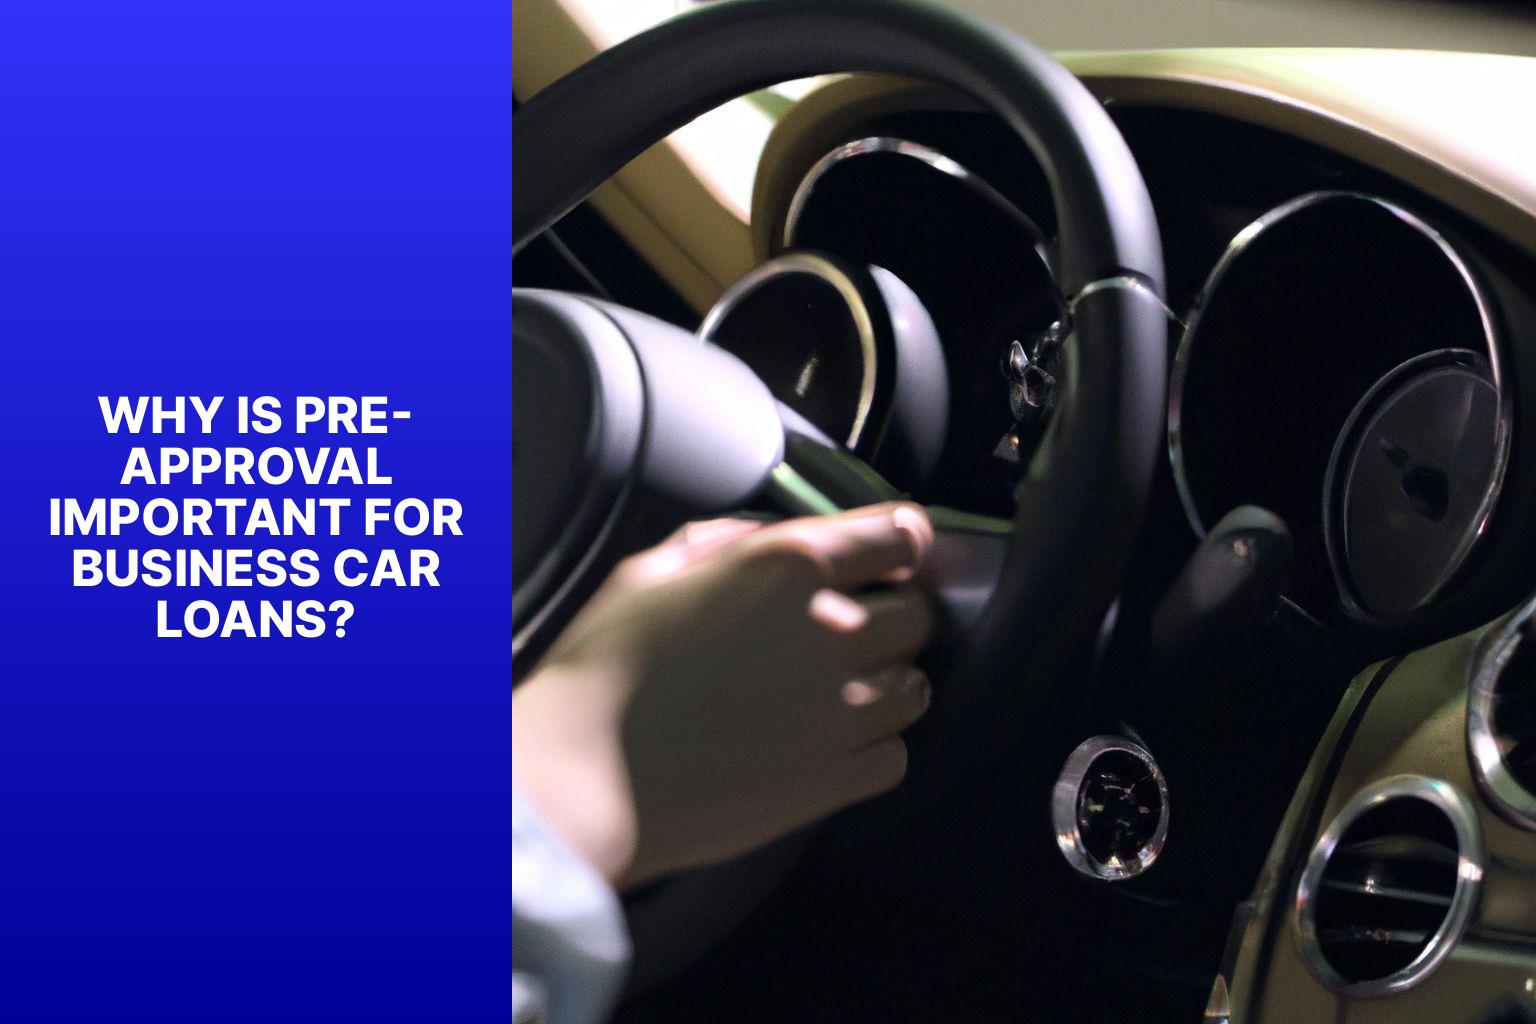 Why is Pre-Approval Important for Business Car Loans? - Prepping for Purchase: Understanding Business Car Loan Pre-Approval 